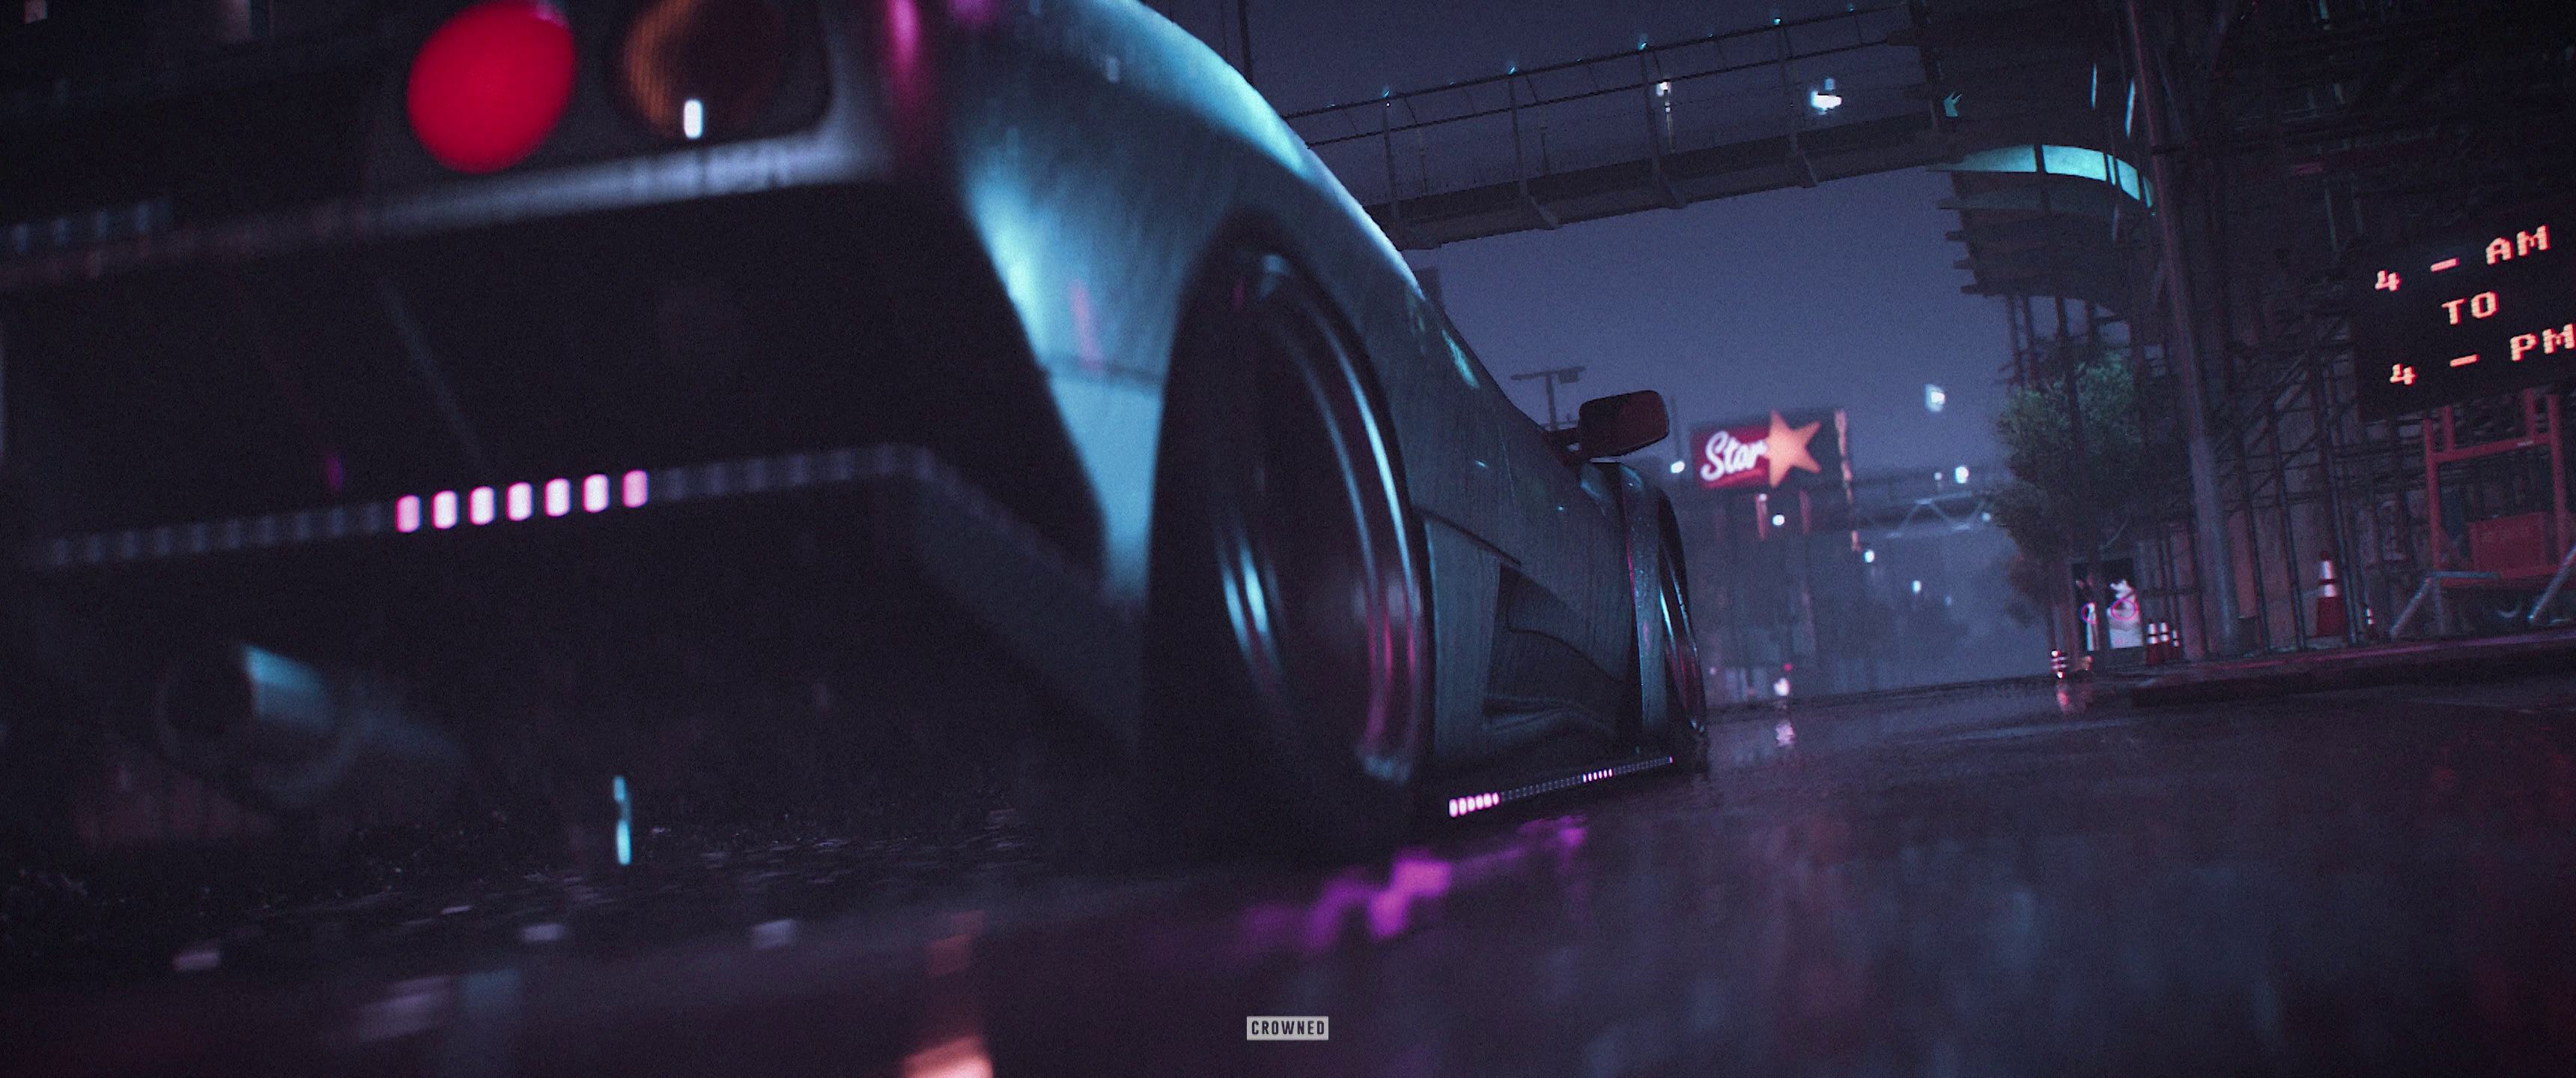 Wallpaper, NFS crowned, Need for Speed, Need For Speed car, cinematic 3440x1440ец